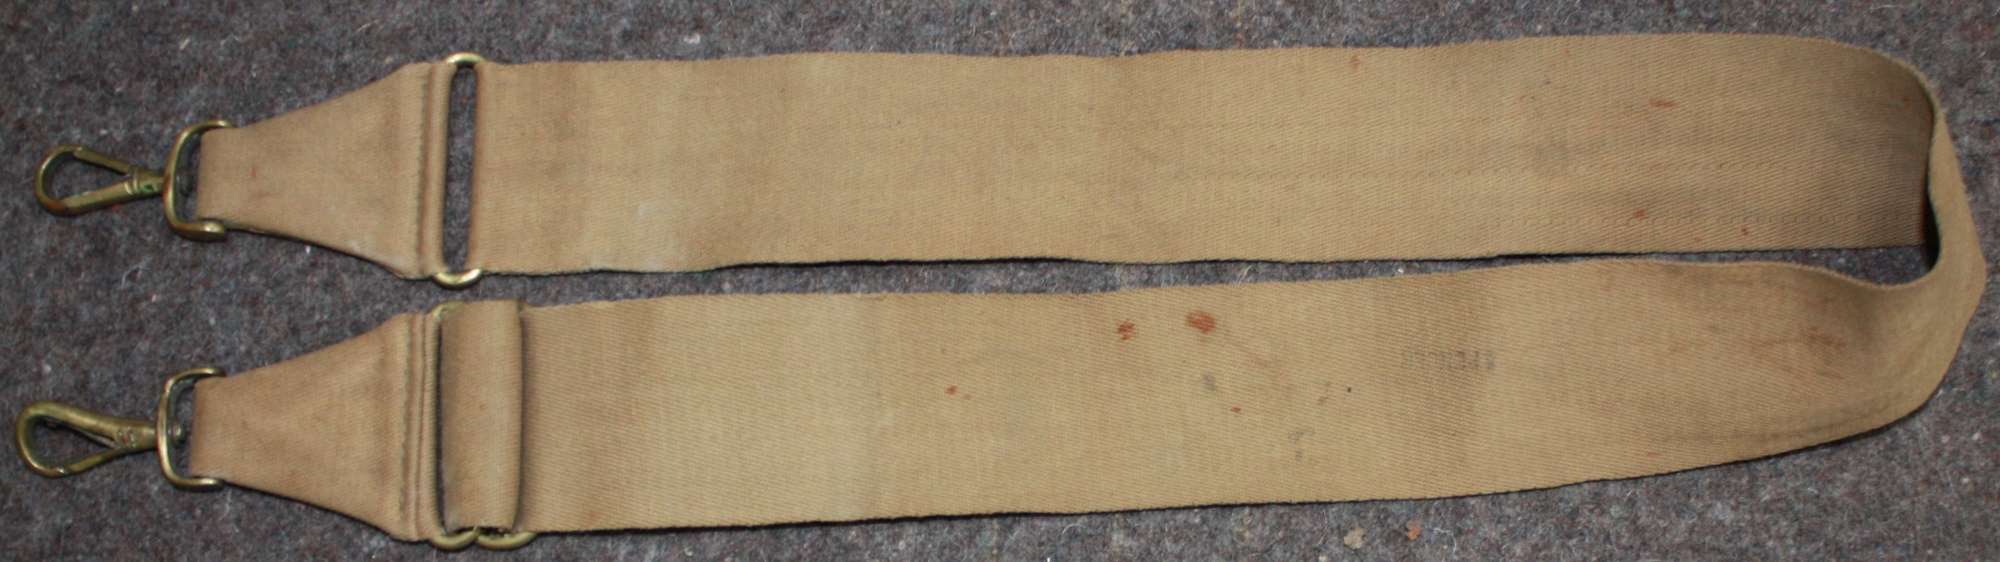 A WWI OFFICERS SIDE PACK / COAT CARRIER STRAP ONLY